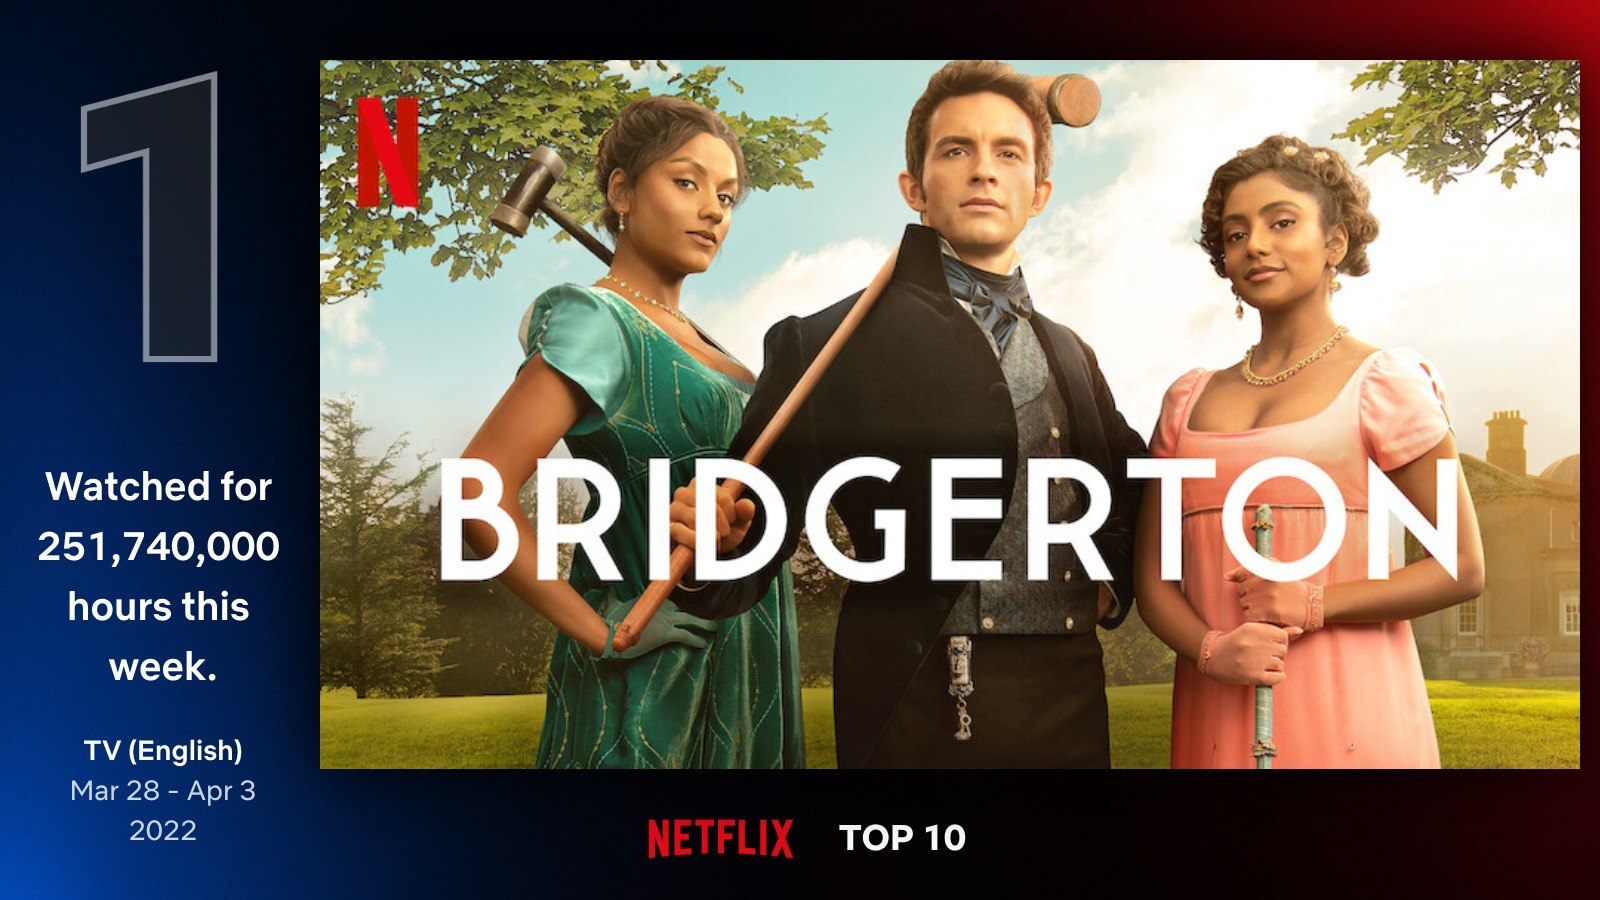 Netflix Top 10: ‘Bridgerton’ Sets Record for Most Watched English Title in a Week